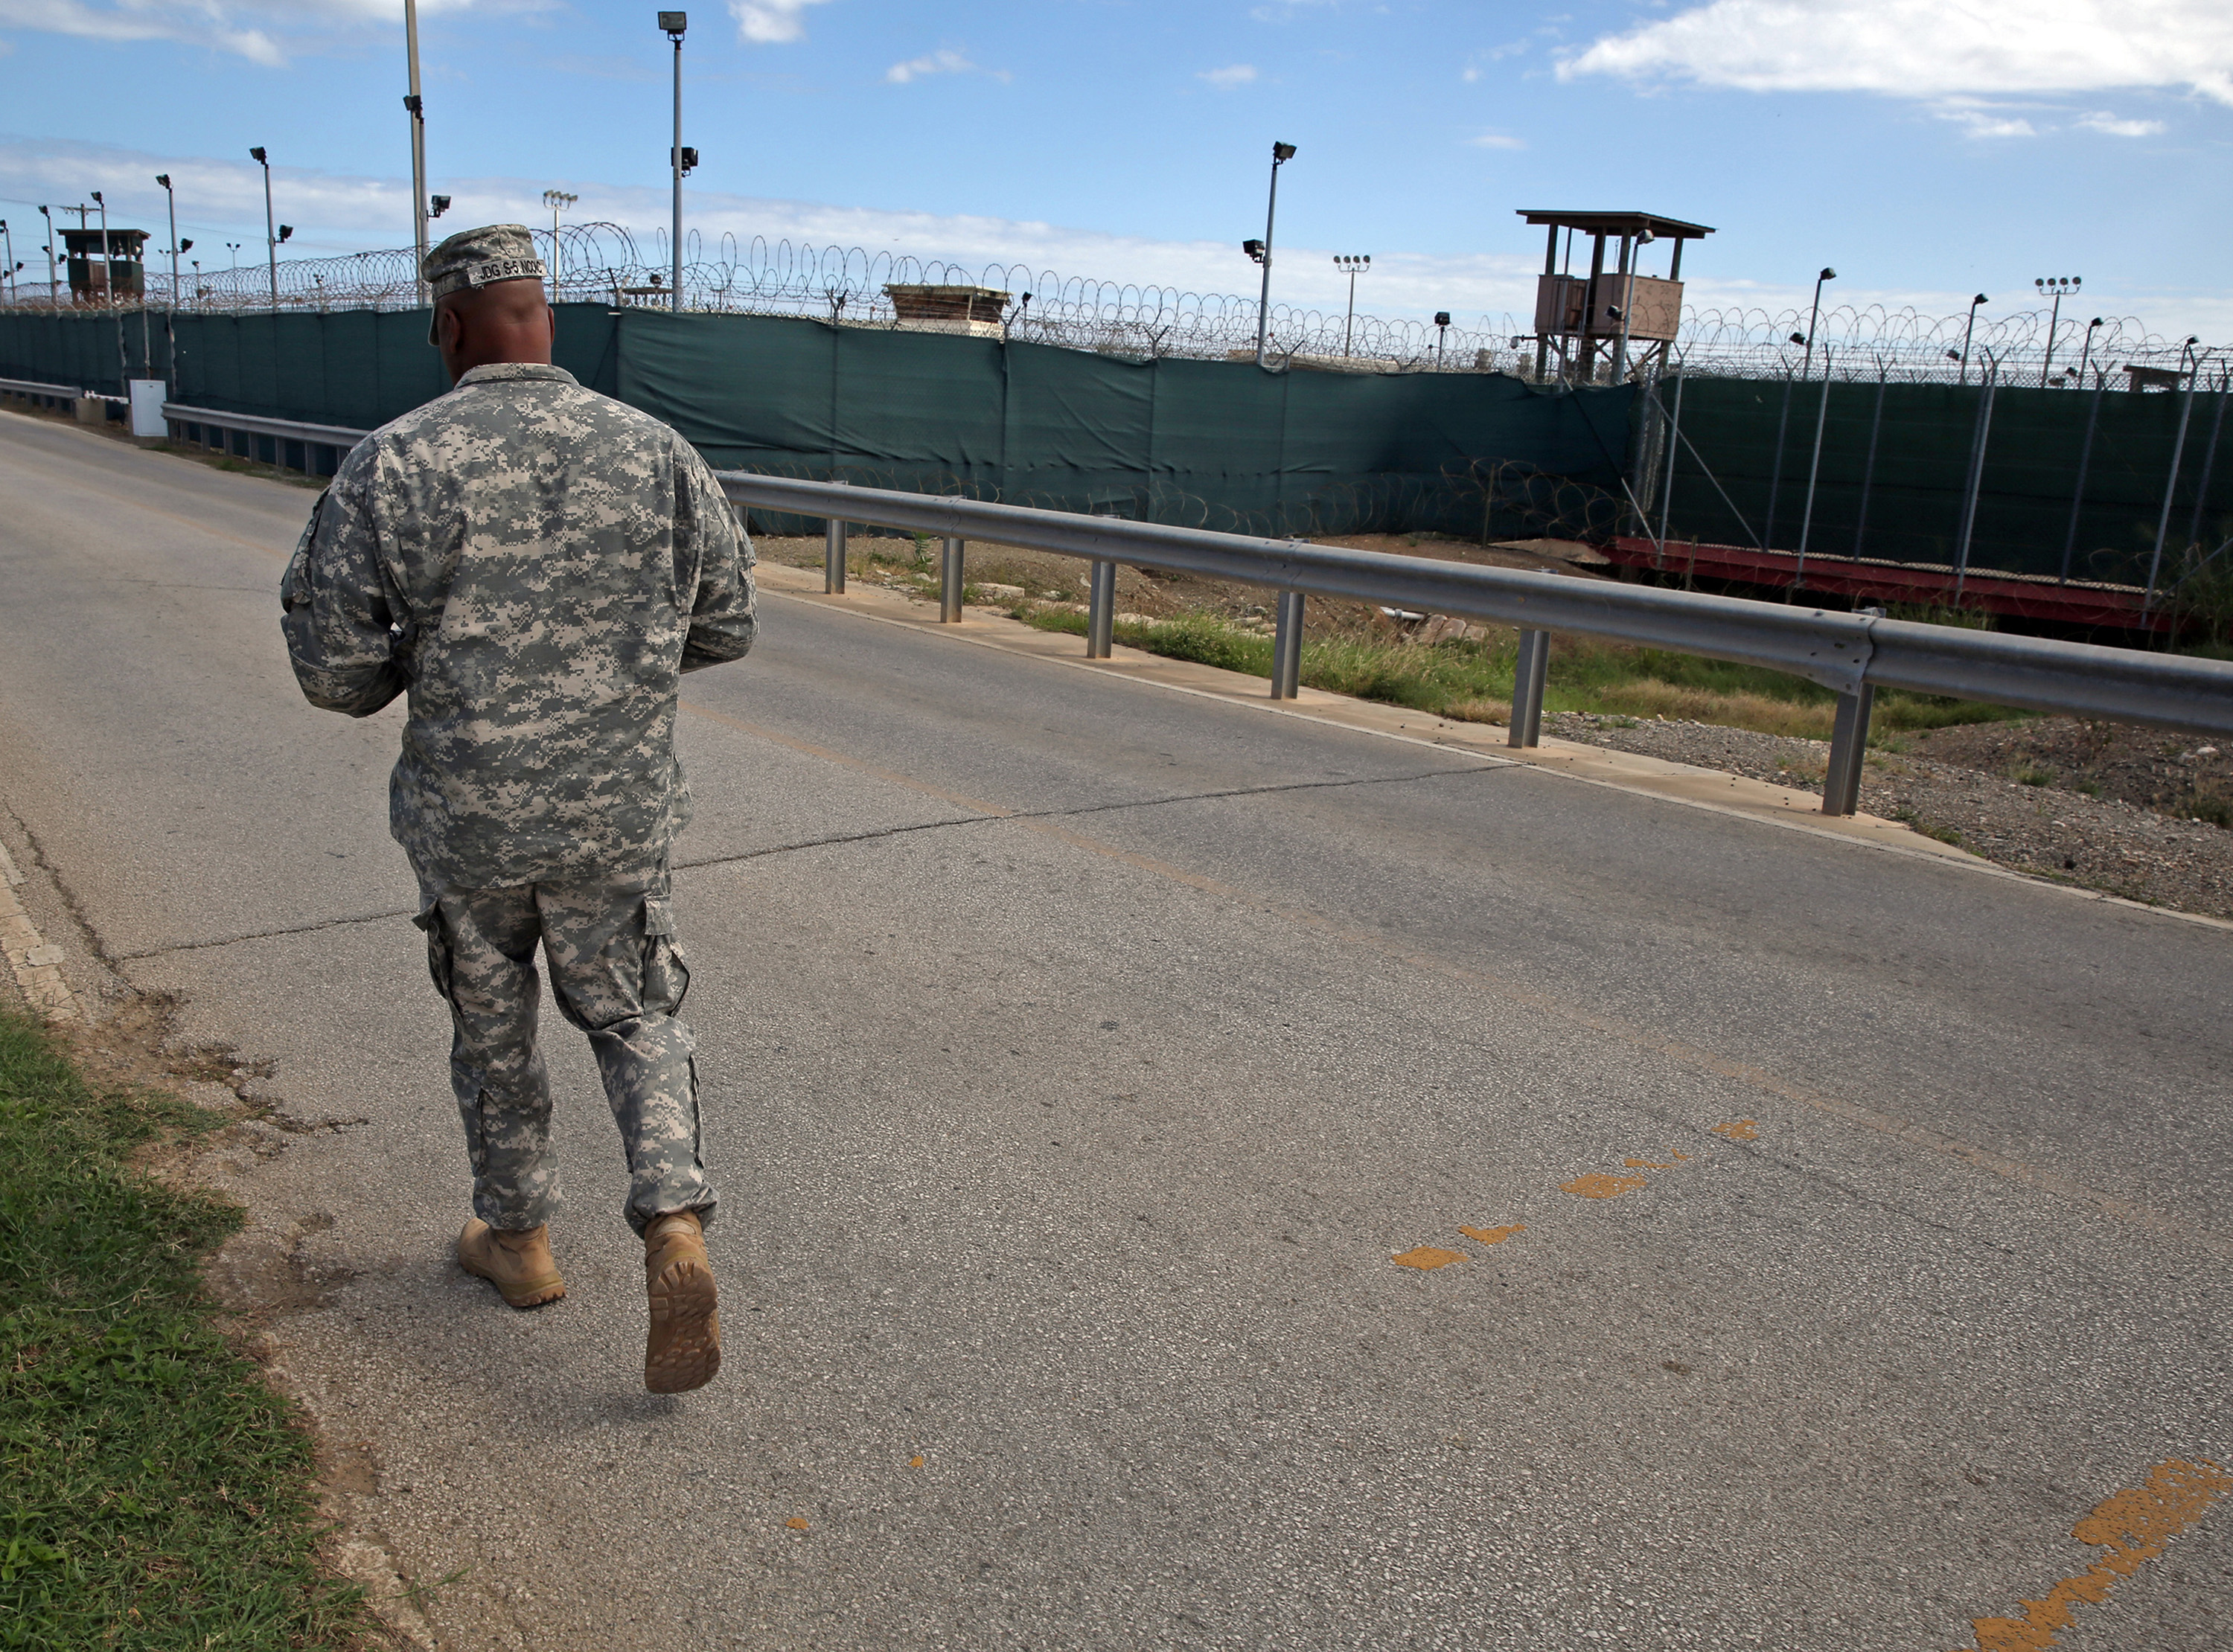 A soldier walks by Camp Delta, which no longer holds detainees, on Tuesday, Nov. 4, 2014 at the U.S. Navy base at Guantanamo Bay, Cuba in this photo approved for release by the U.S. military. (Miami Herald&mdash;TNS via Getty Images)